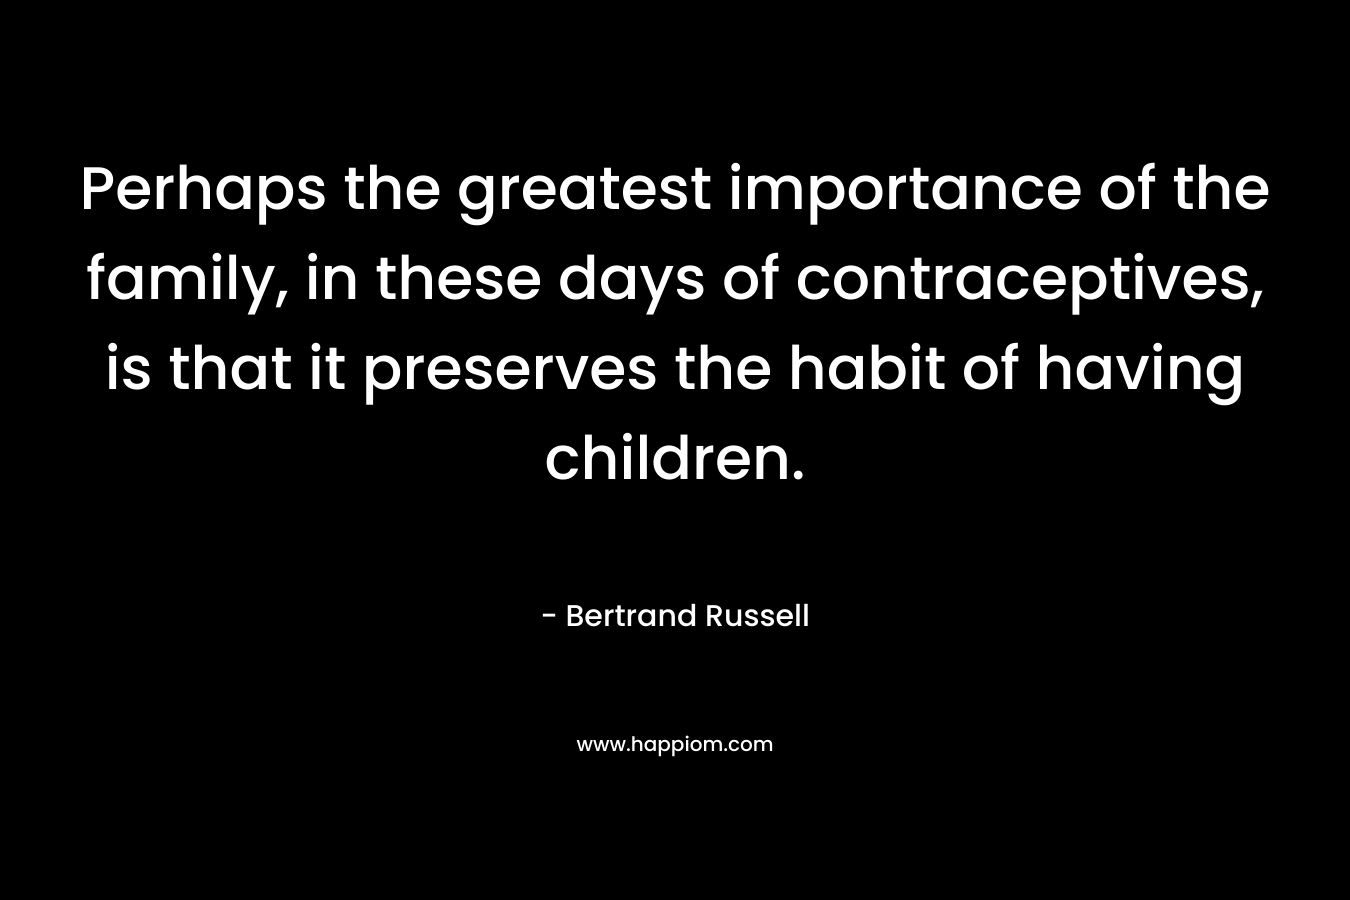 Perhaps the greatest importance of the family, in these days of contraceptives, is that it preserves the habit of having children. – Bertrand Russell